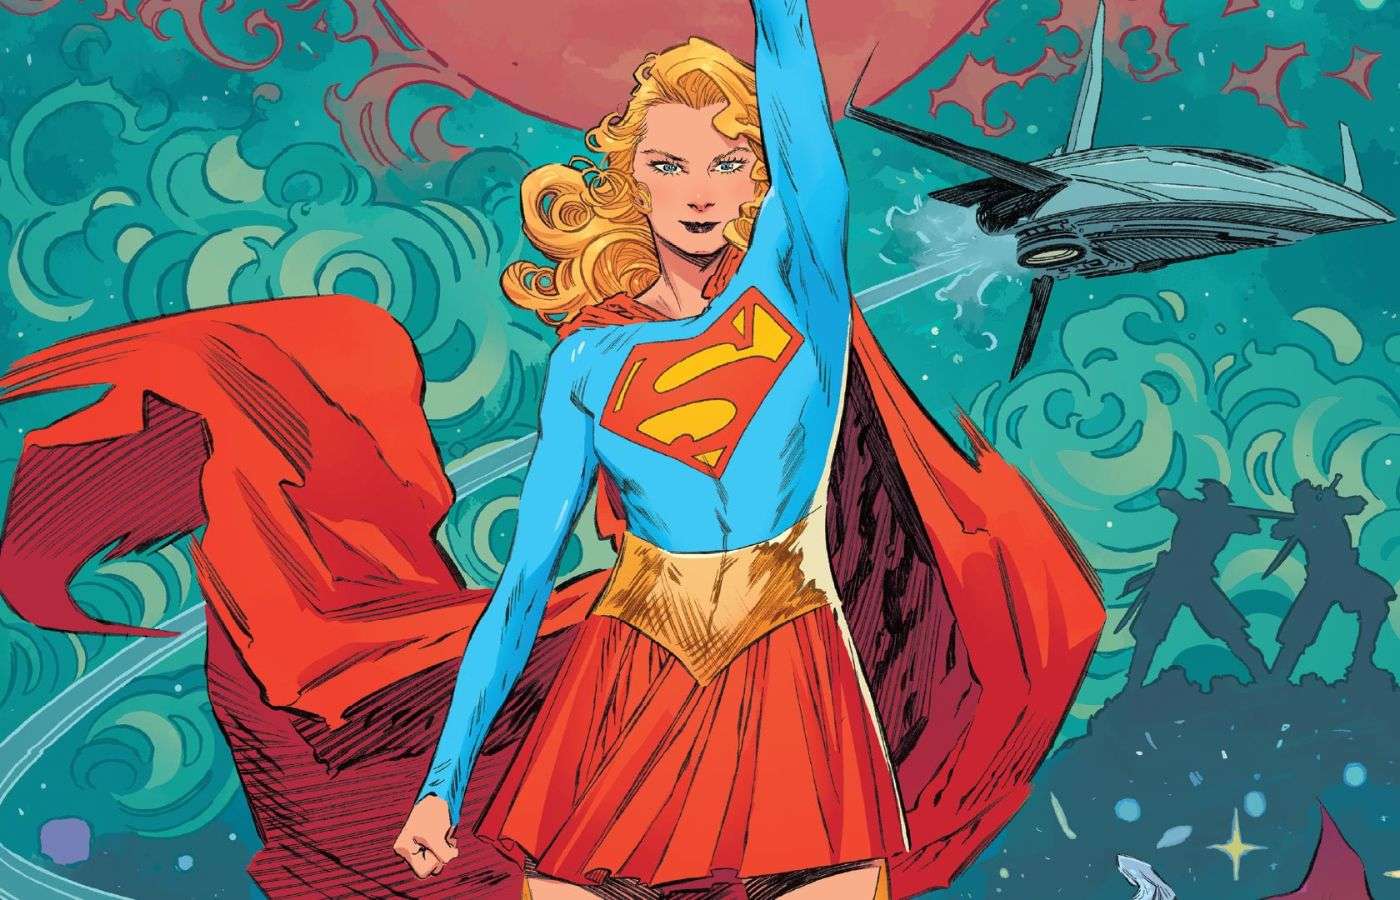 Supergirl in the DC Comics